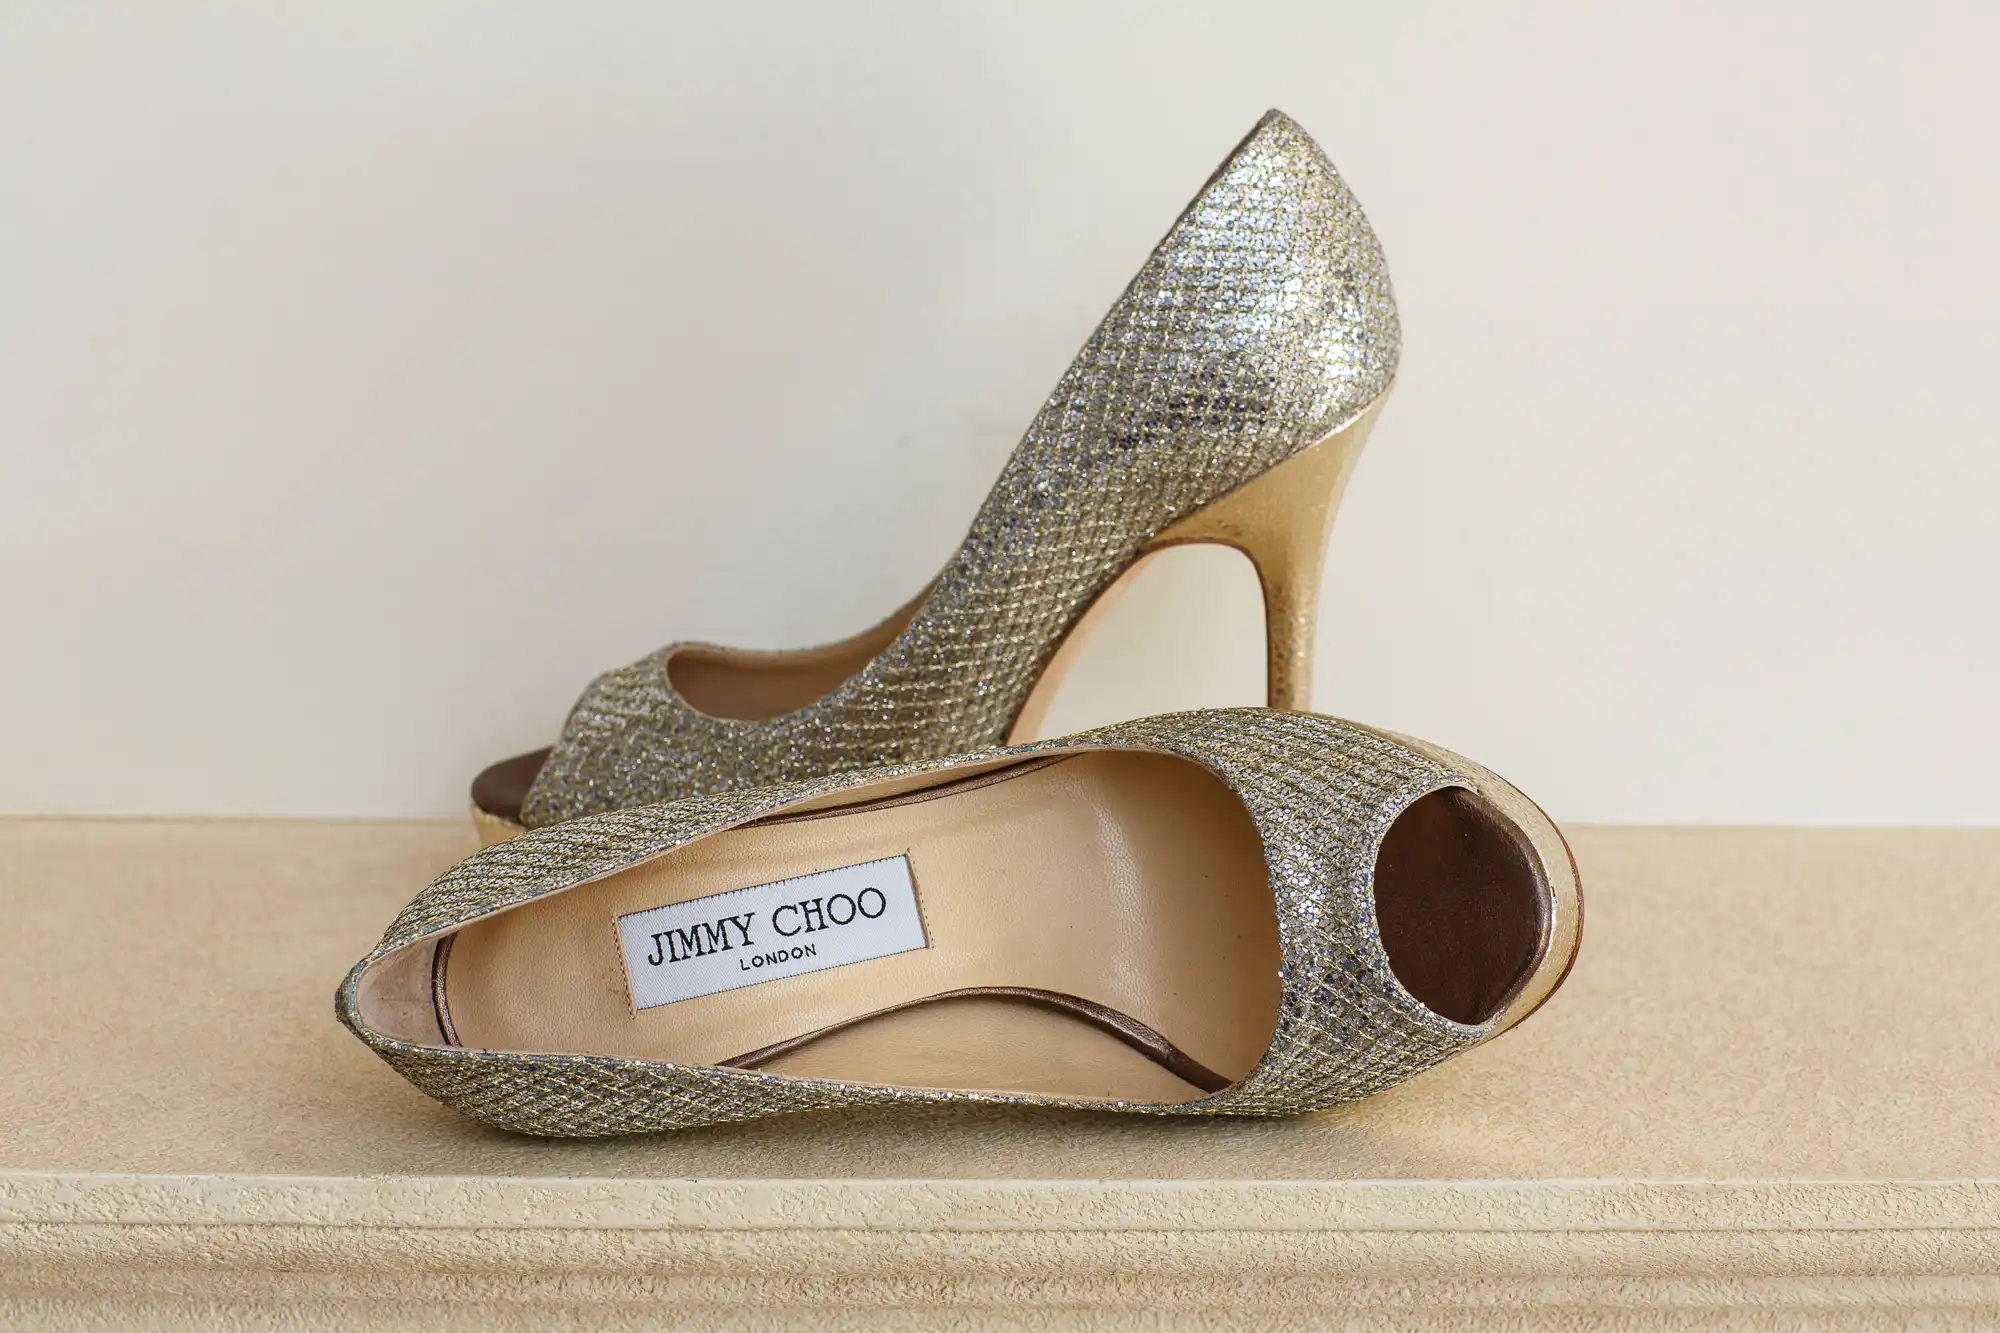 A pair of glittery gold jimmy choo high heels displayed on a beige surface against a neutral background.